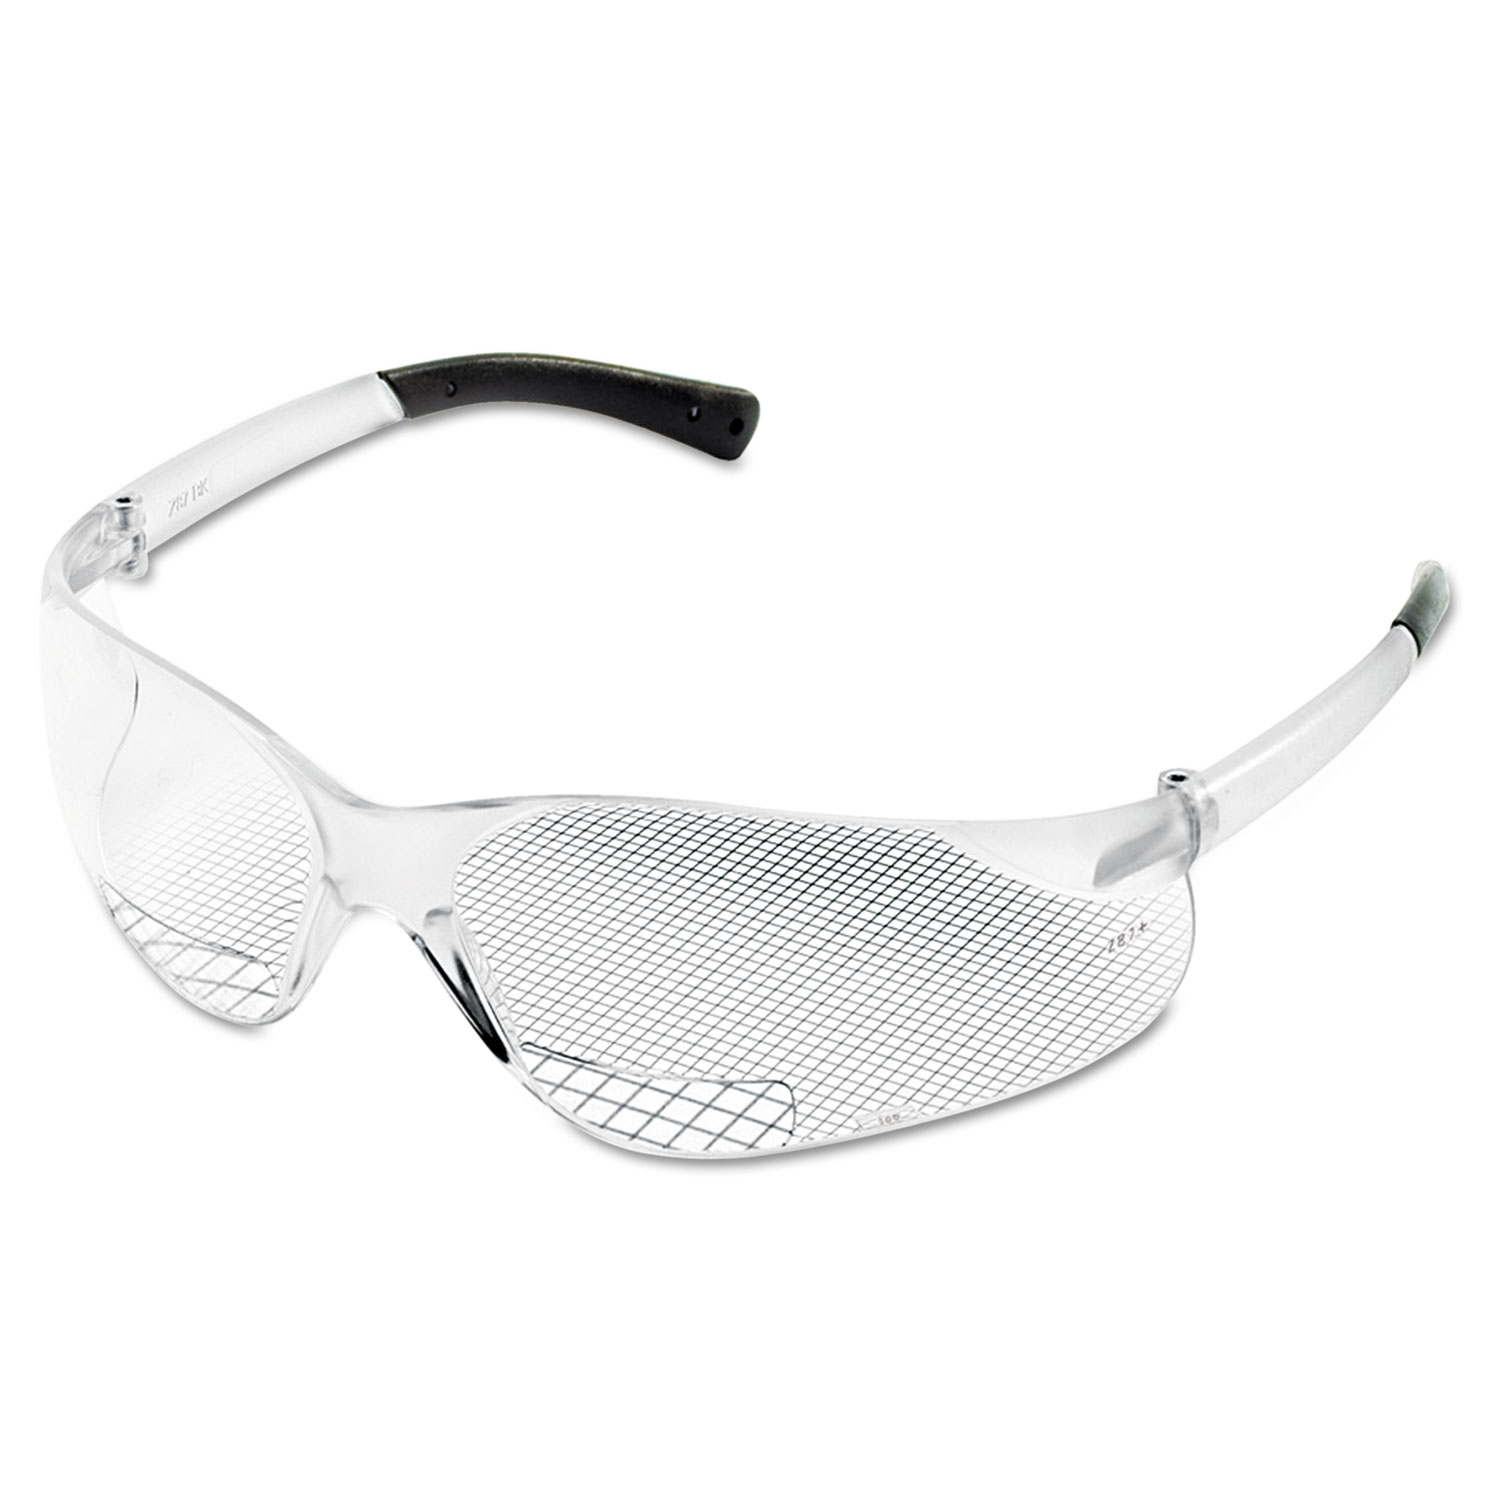 Bearkat Magnifier Protective Eyewear, Clear, 1.00 Diopter